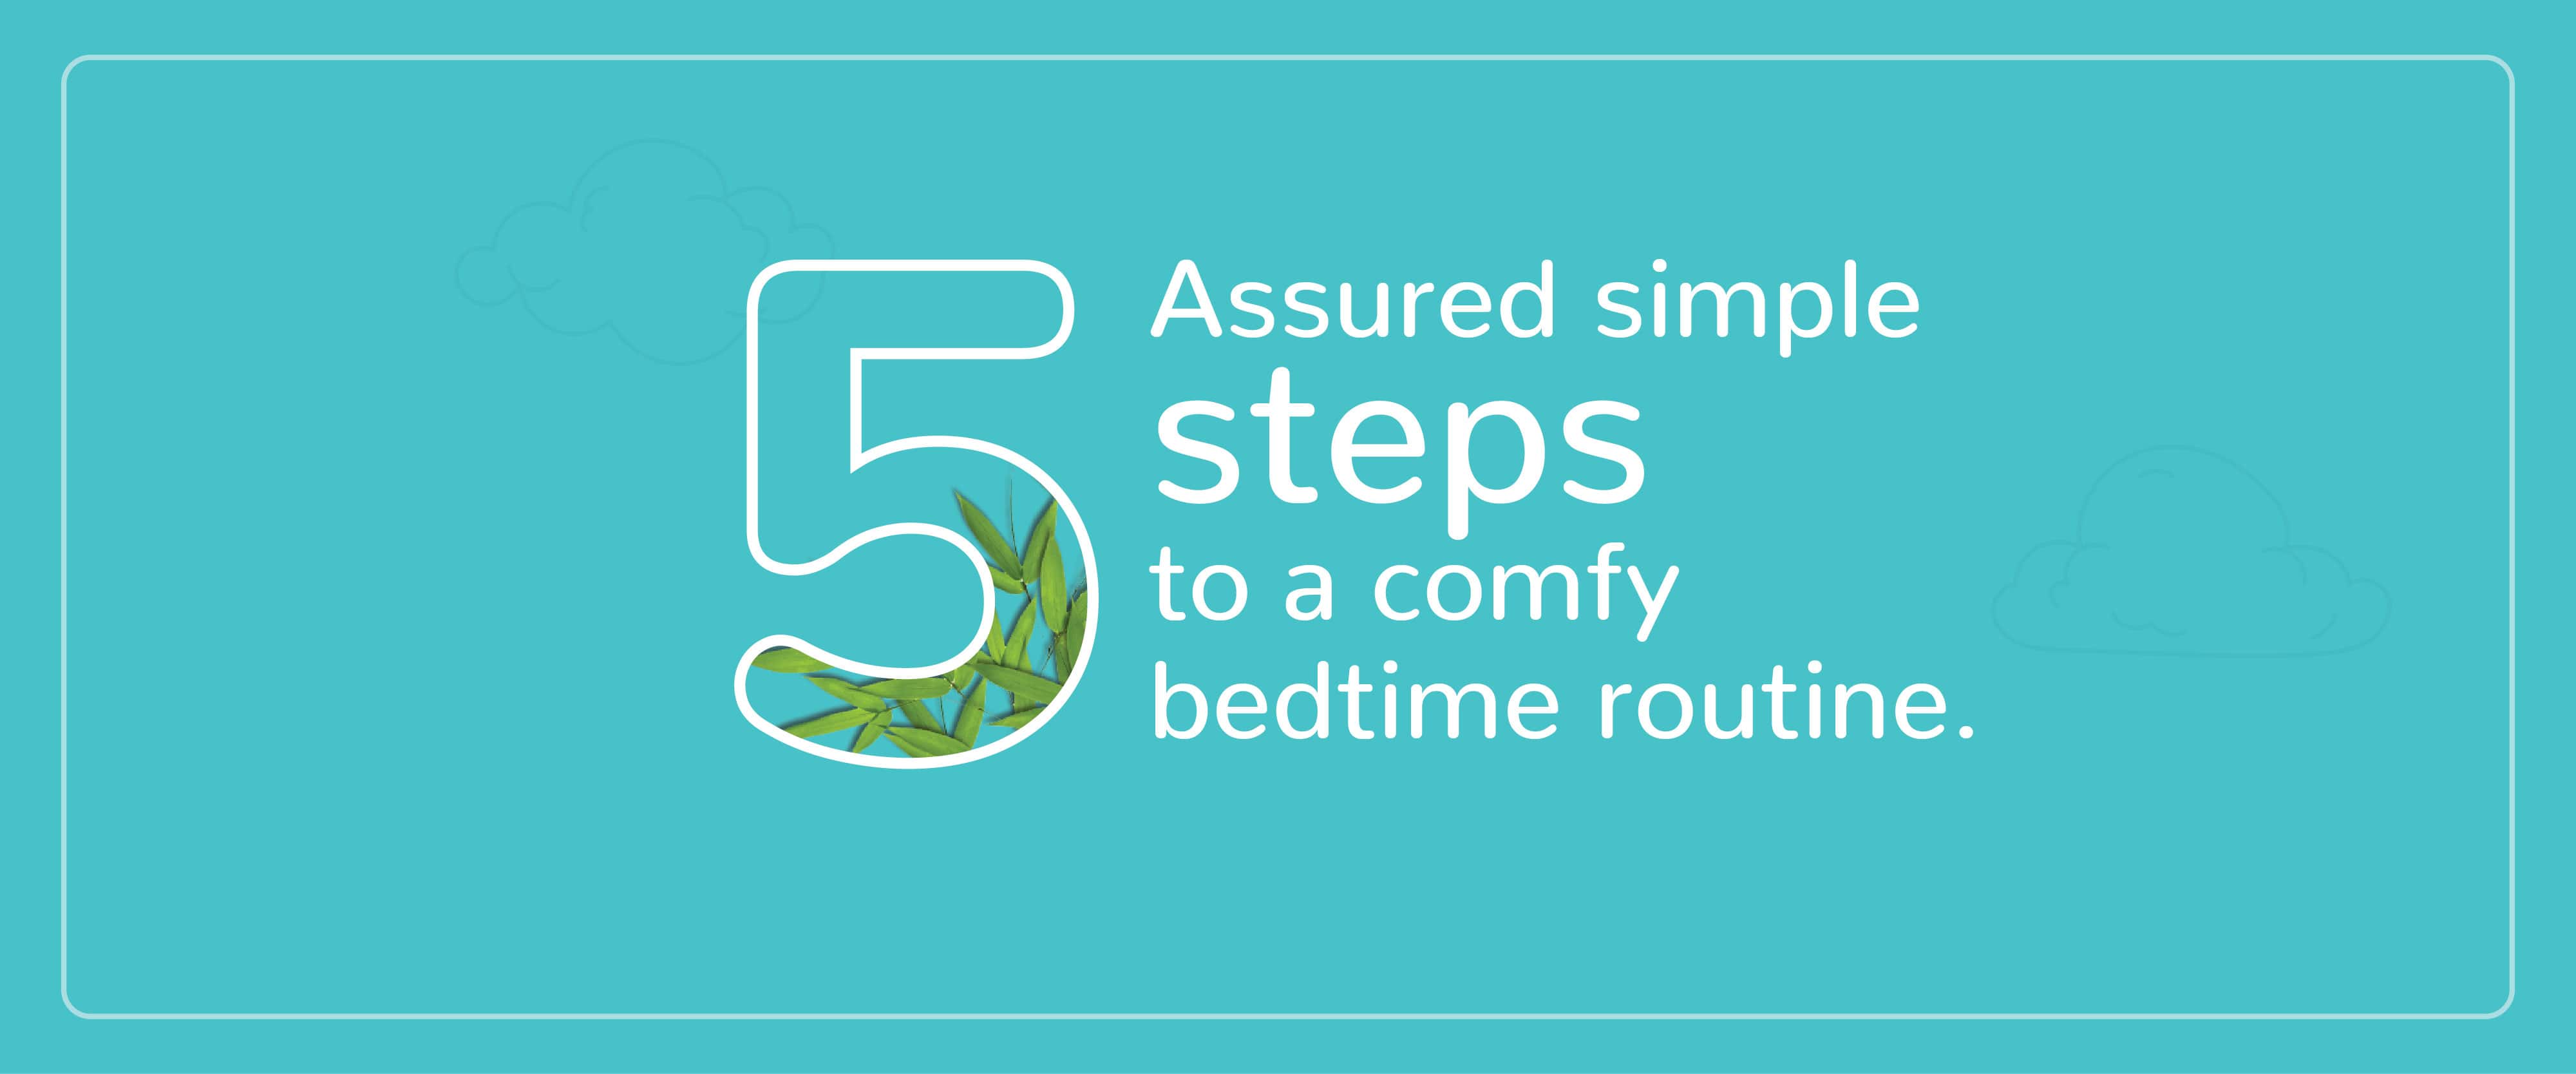 5 assured simple steps to a comfy bedtime routine